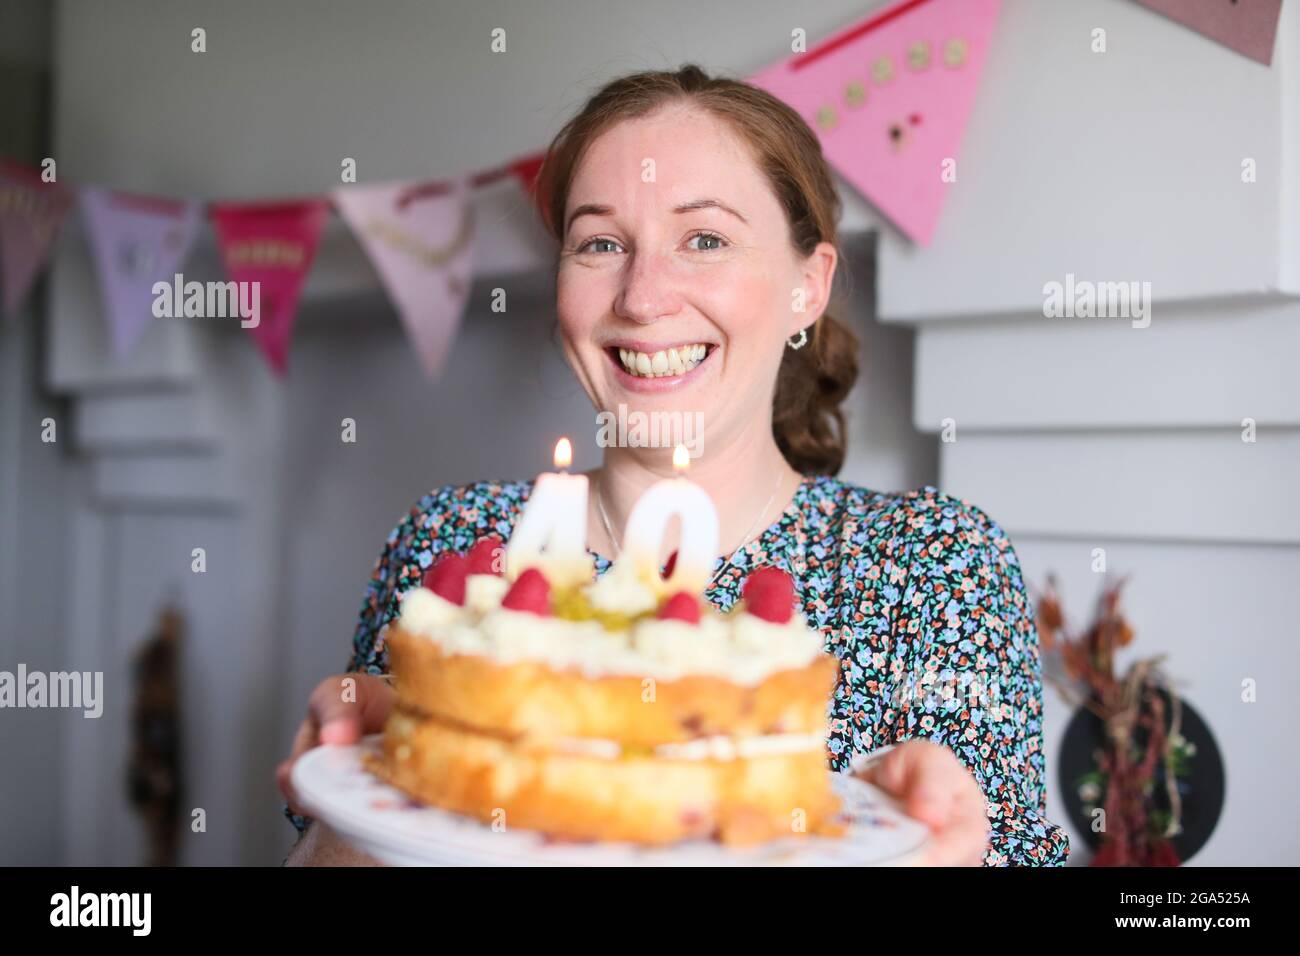 A woman celebrates her 40th birthday by blowing out the candles on her birthday cake in Armoy, County Antrim, Northern Ireland. Stock Photo